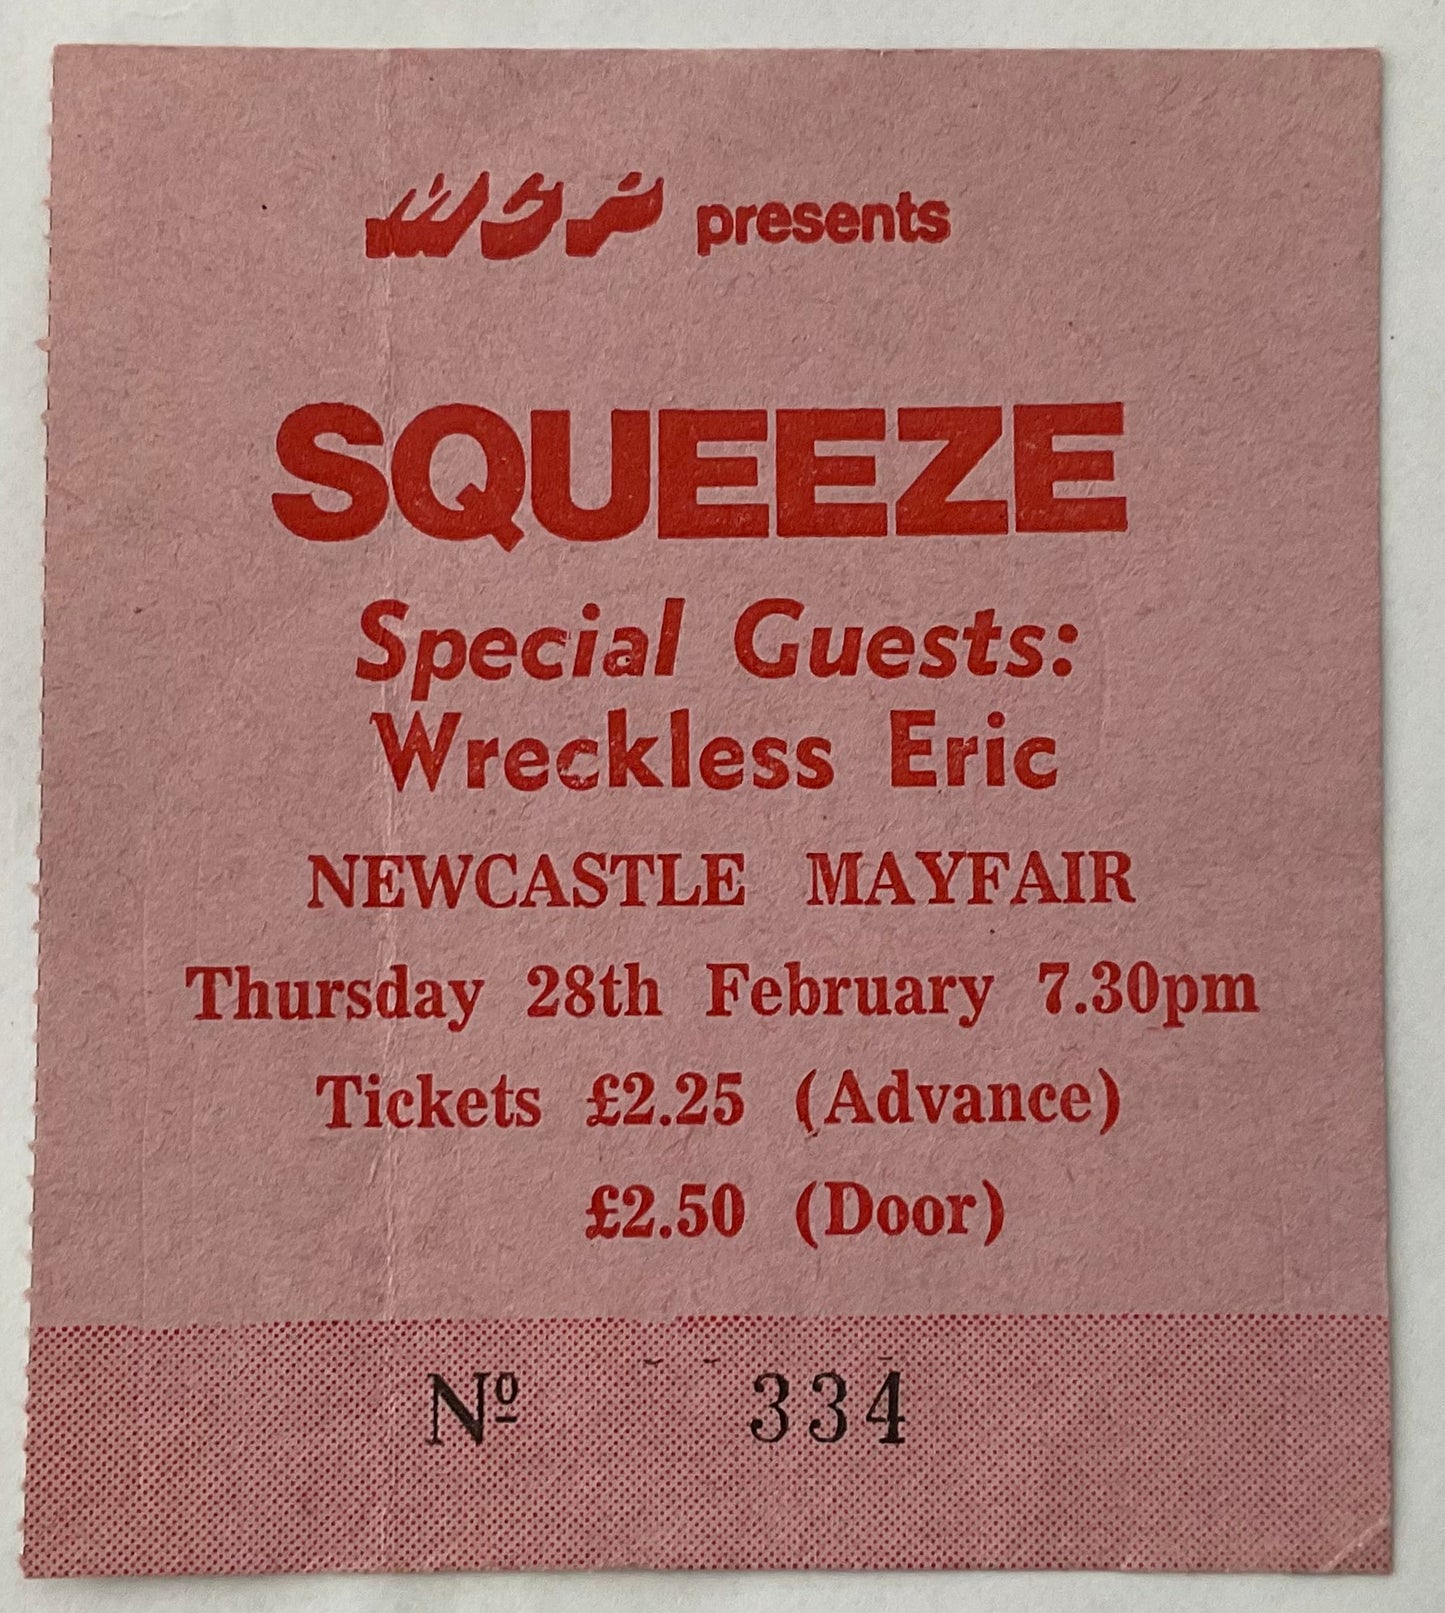 Squeeze Wreckless Eric Original Used Concert Ticket Newcastle Mayfair 28th Feb 1980